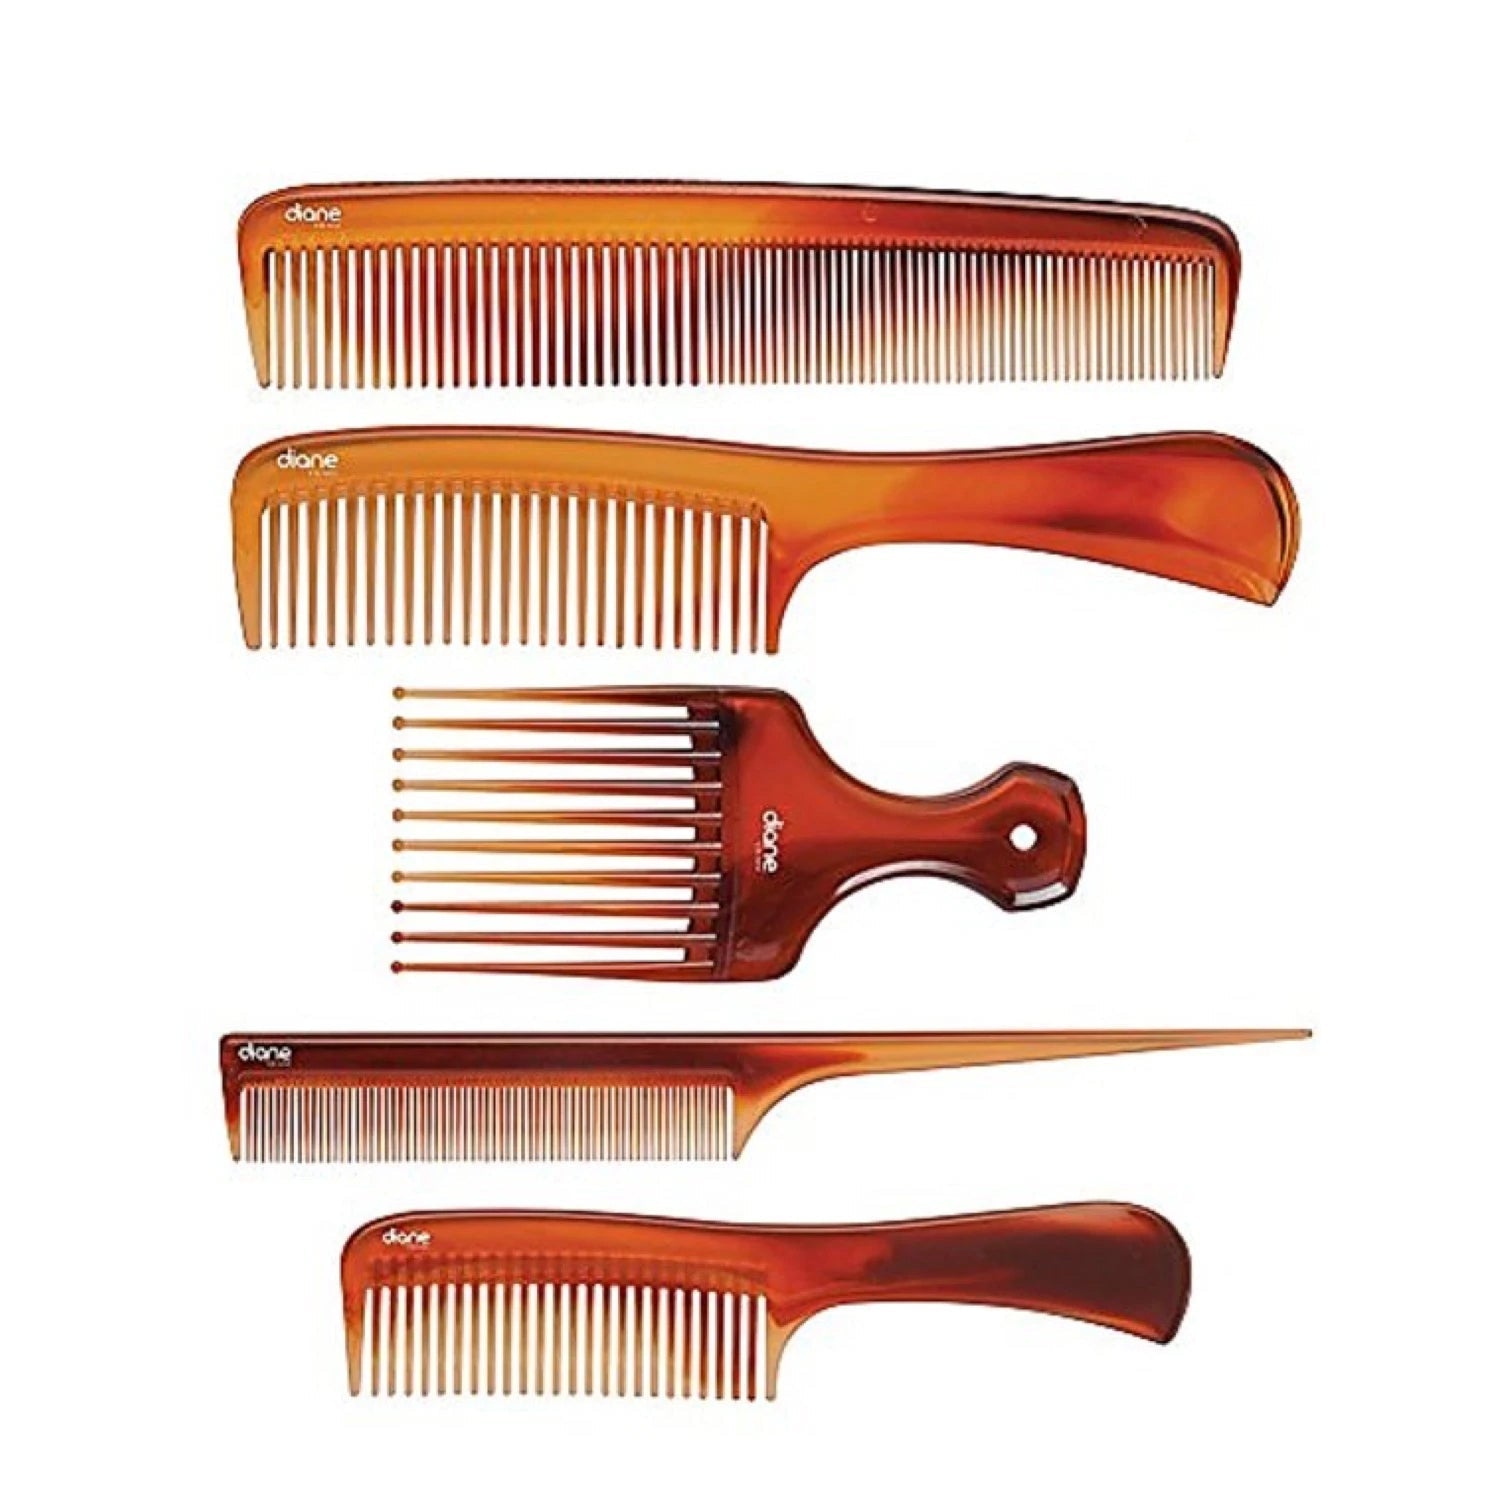 Assorted Tortoise Comb Kit | 5 Pack | DBC016 | DIANE HAIR COLORING ACCESSORIES DIANE 